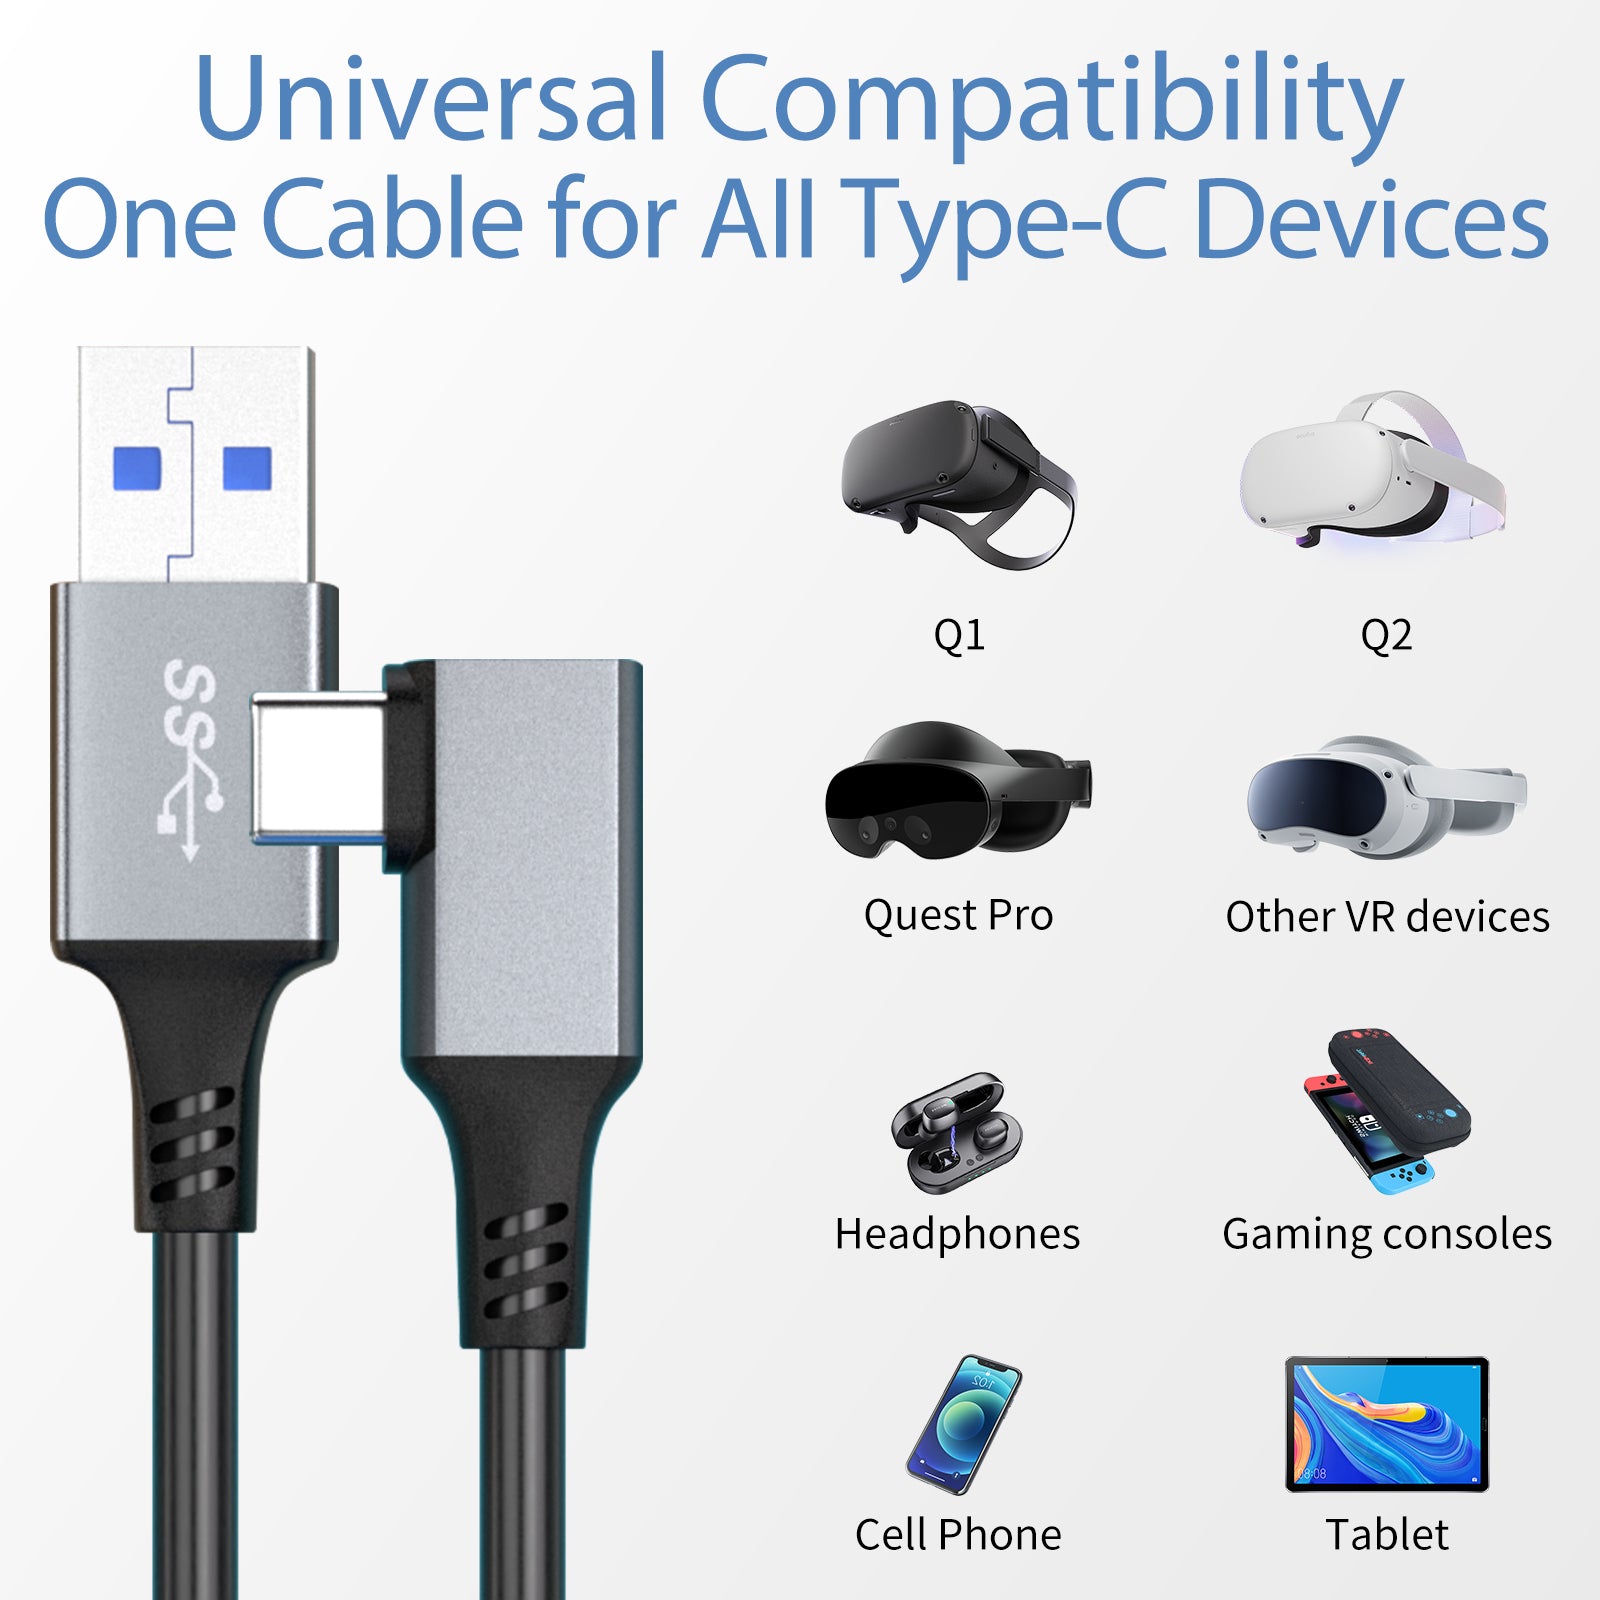 Link Cable 16FT Compatible for Oculus/Meta Quest 2/Pro, USB3.2 Gen 1 Type A to C Charging Cable for VR Headset Gaming PC, High Speed Data Transfer and Fast Charge